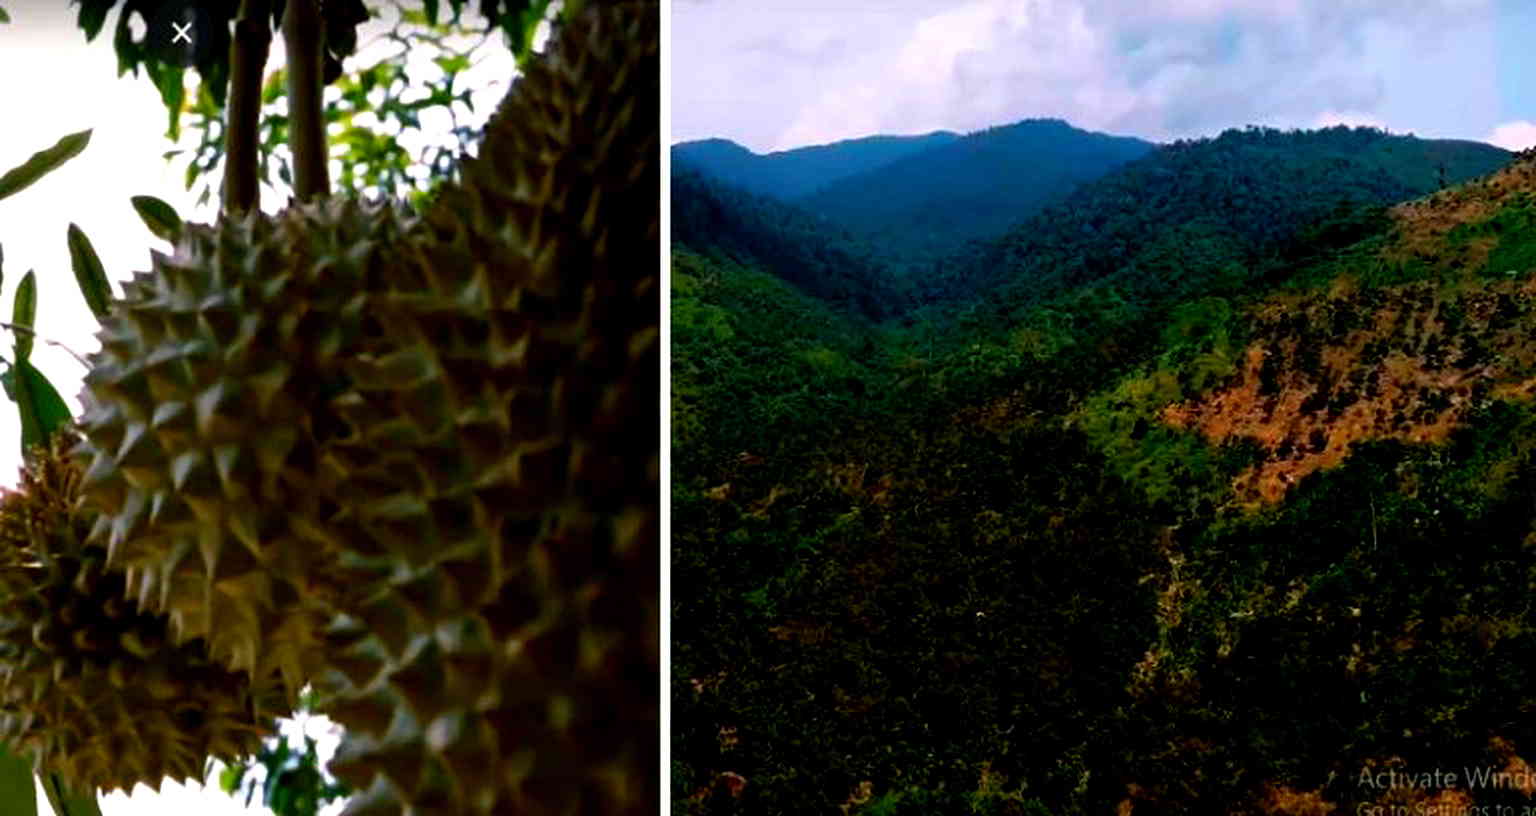 China’s Craving For Durian Threatens Malaysia’s Rainforests, Environmentalists Warn